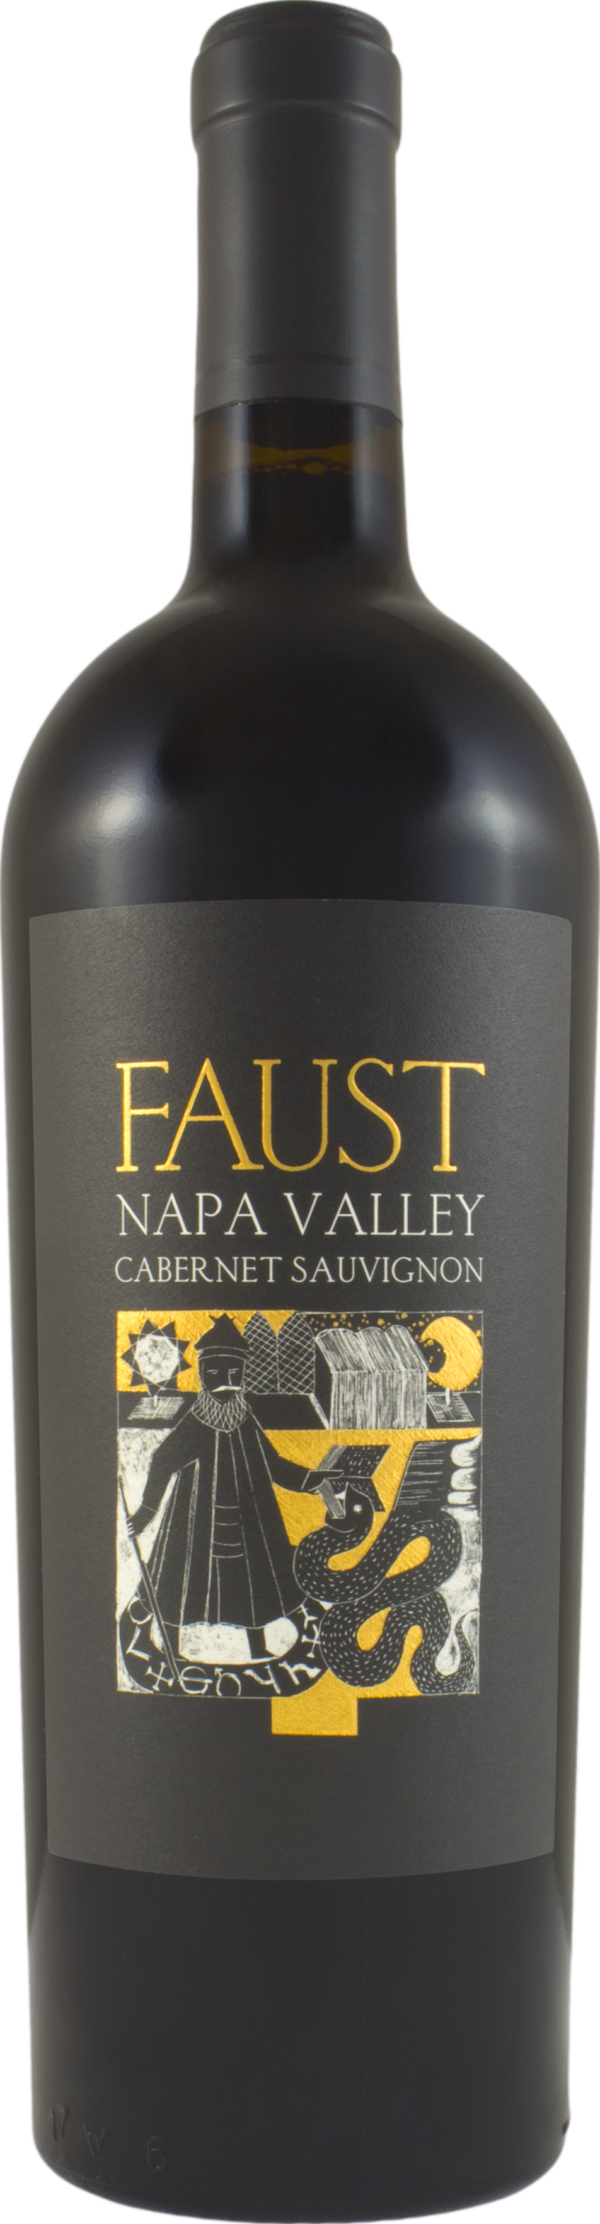 Product image of Faust Cabernet Sauvignon 2019 from 8wines